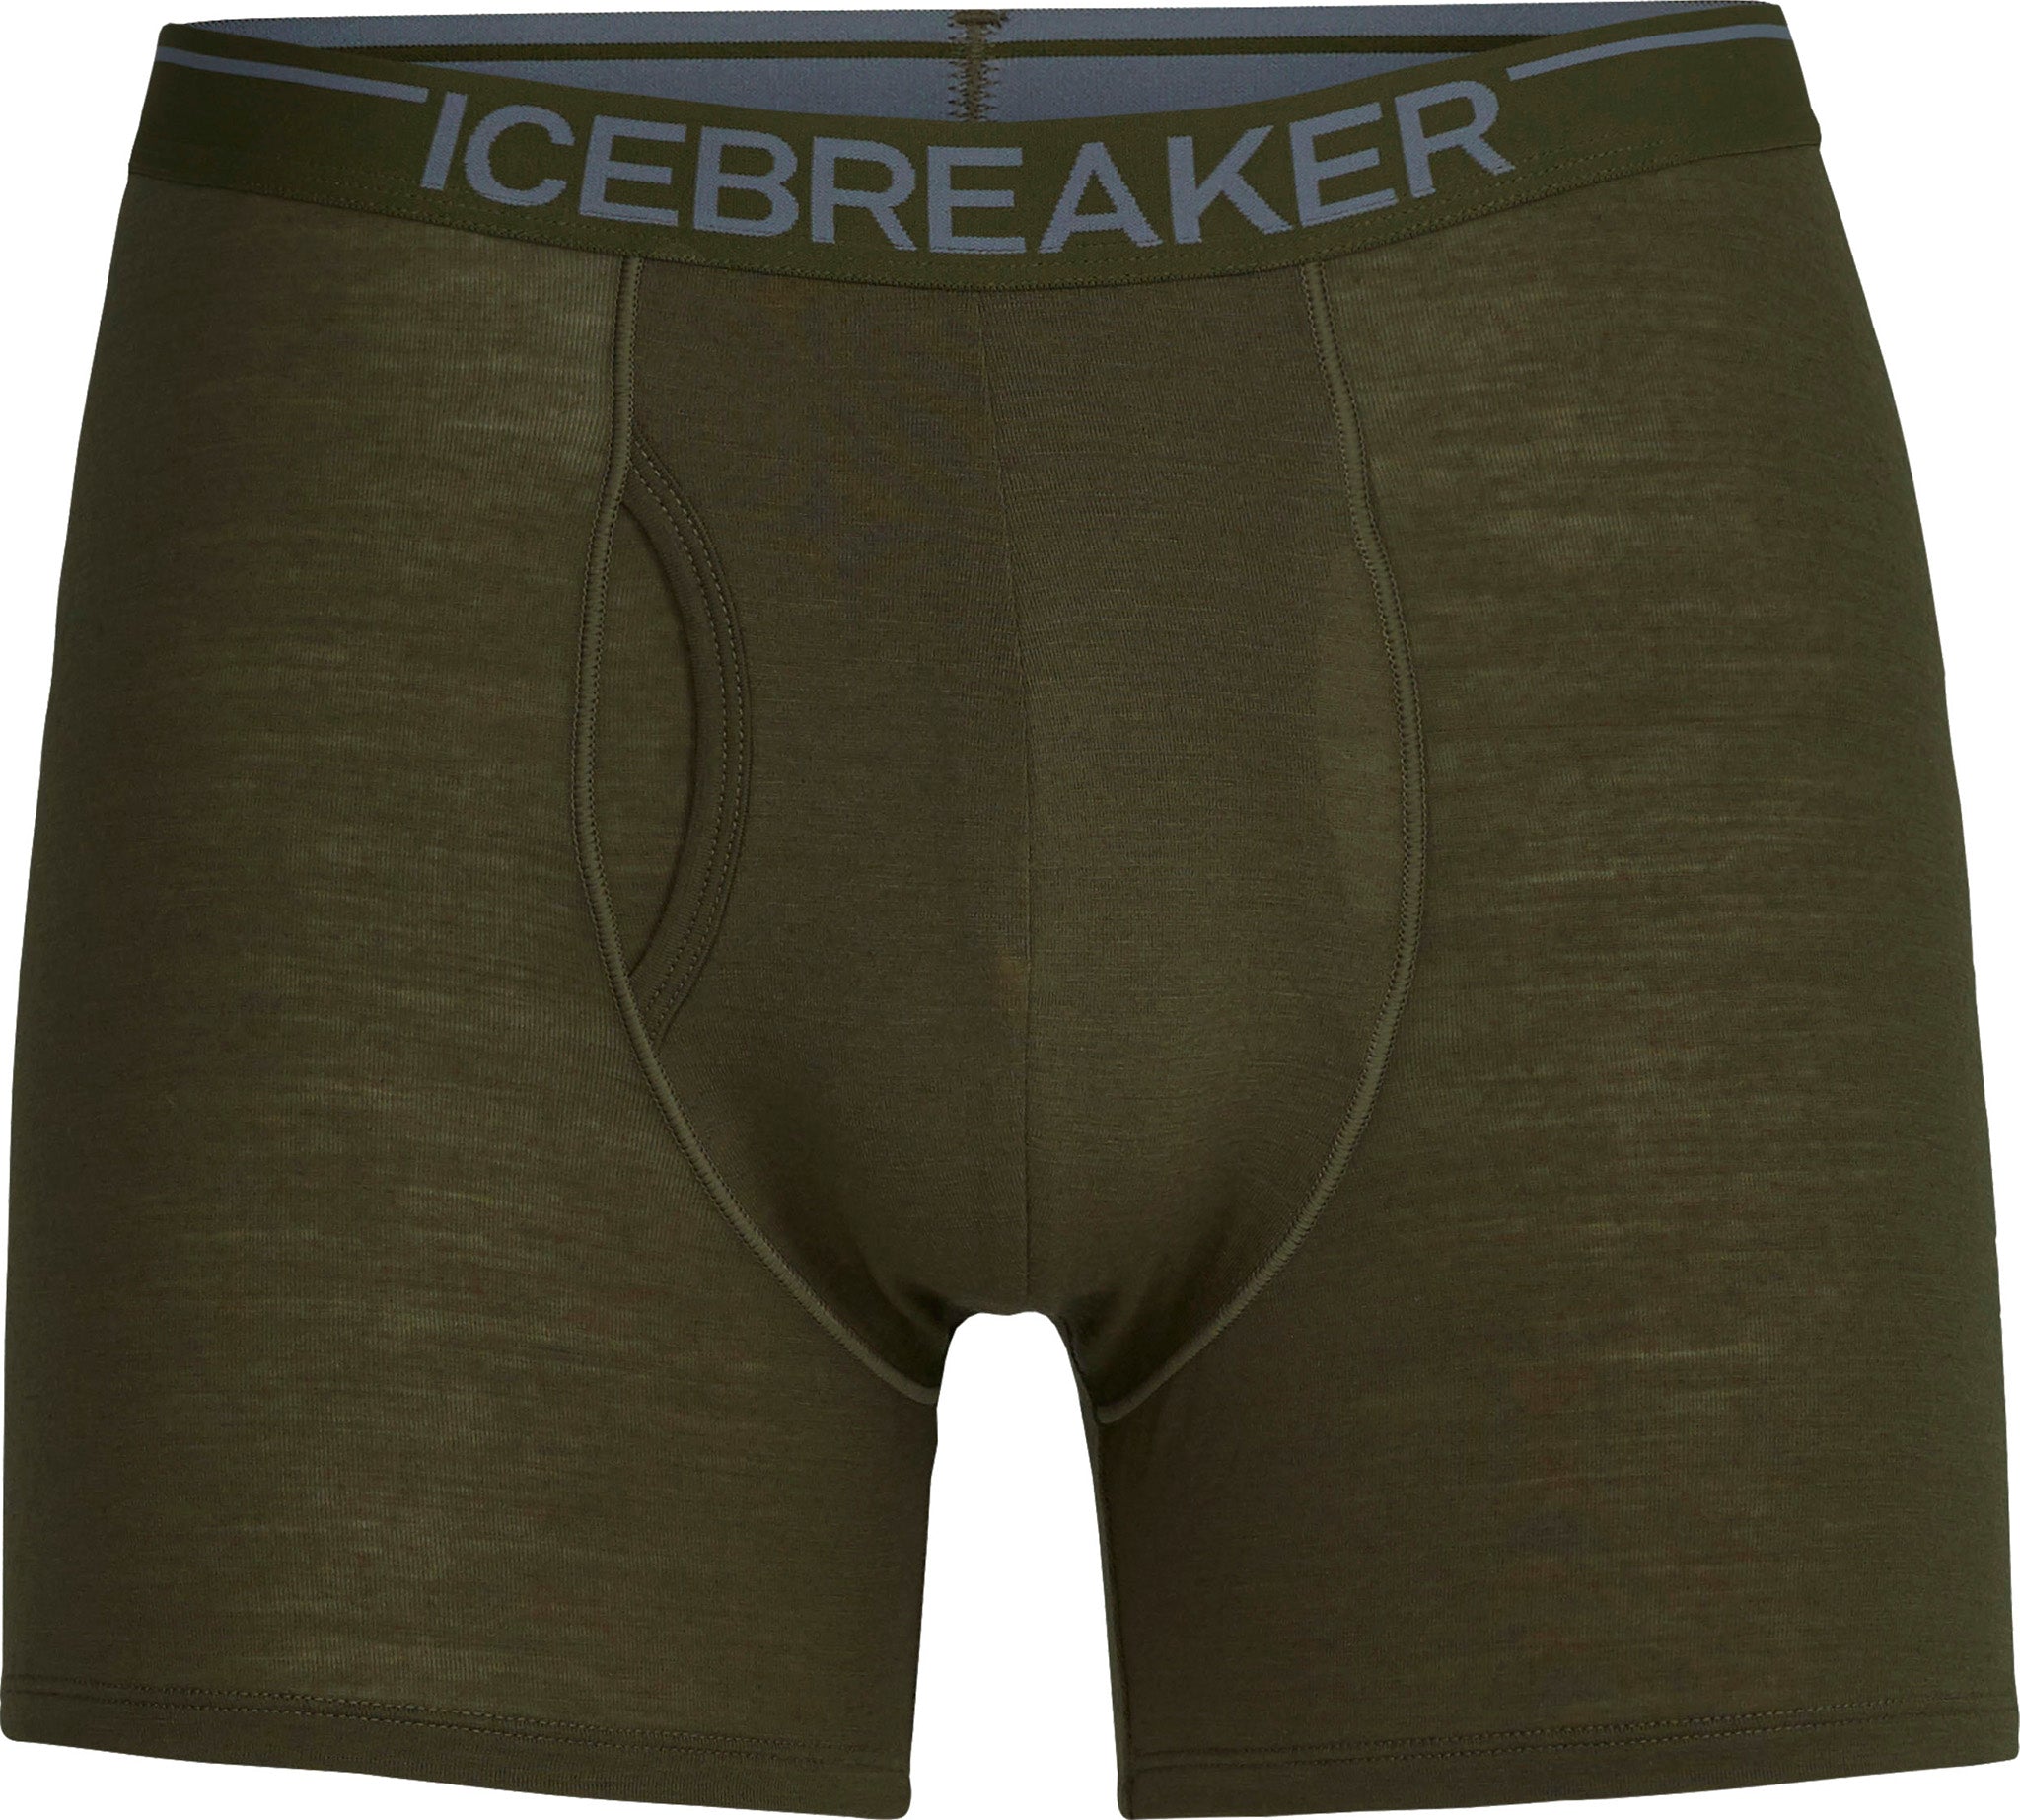 icebreaker Anatomica Boxers with Fly - Men's | Altitude Sports